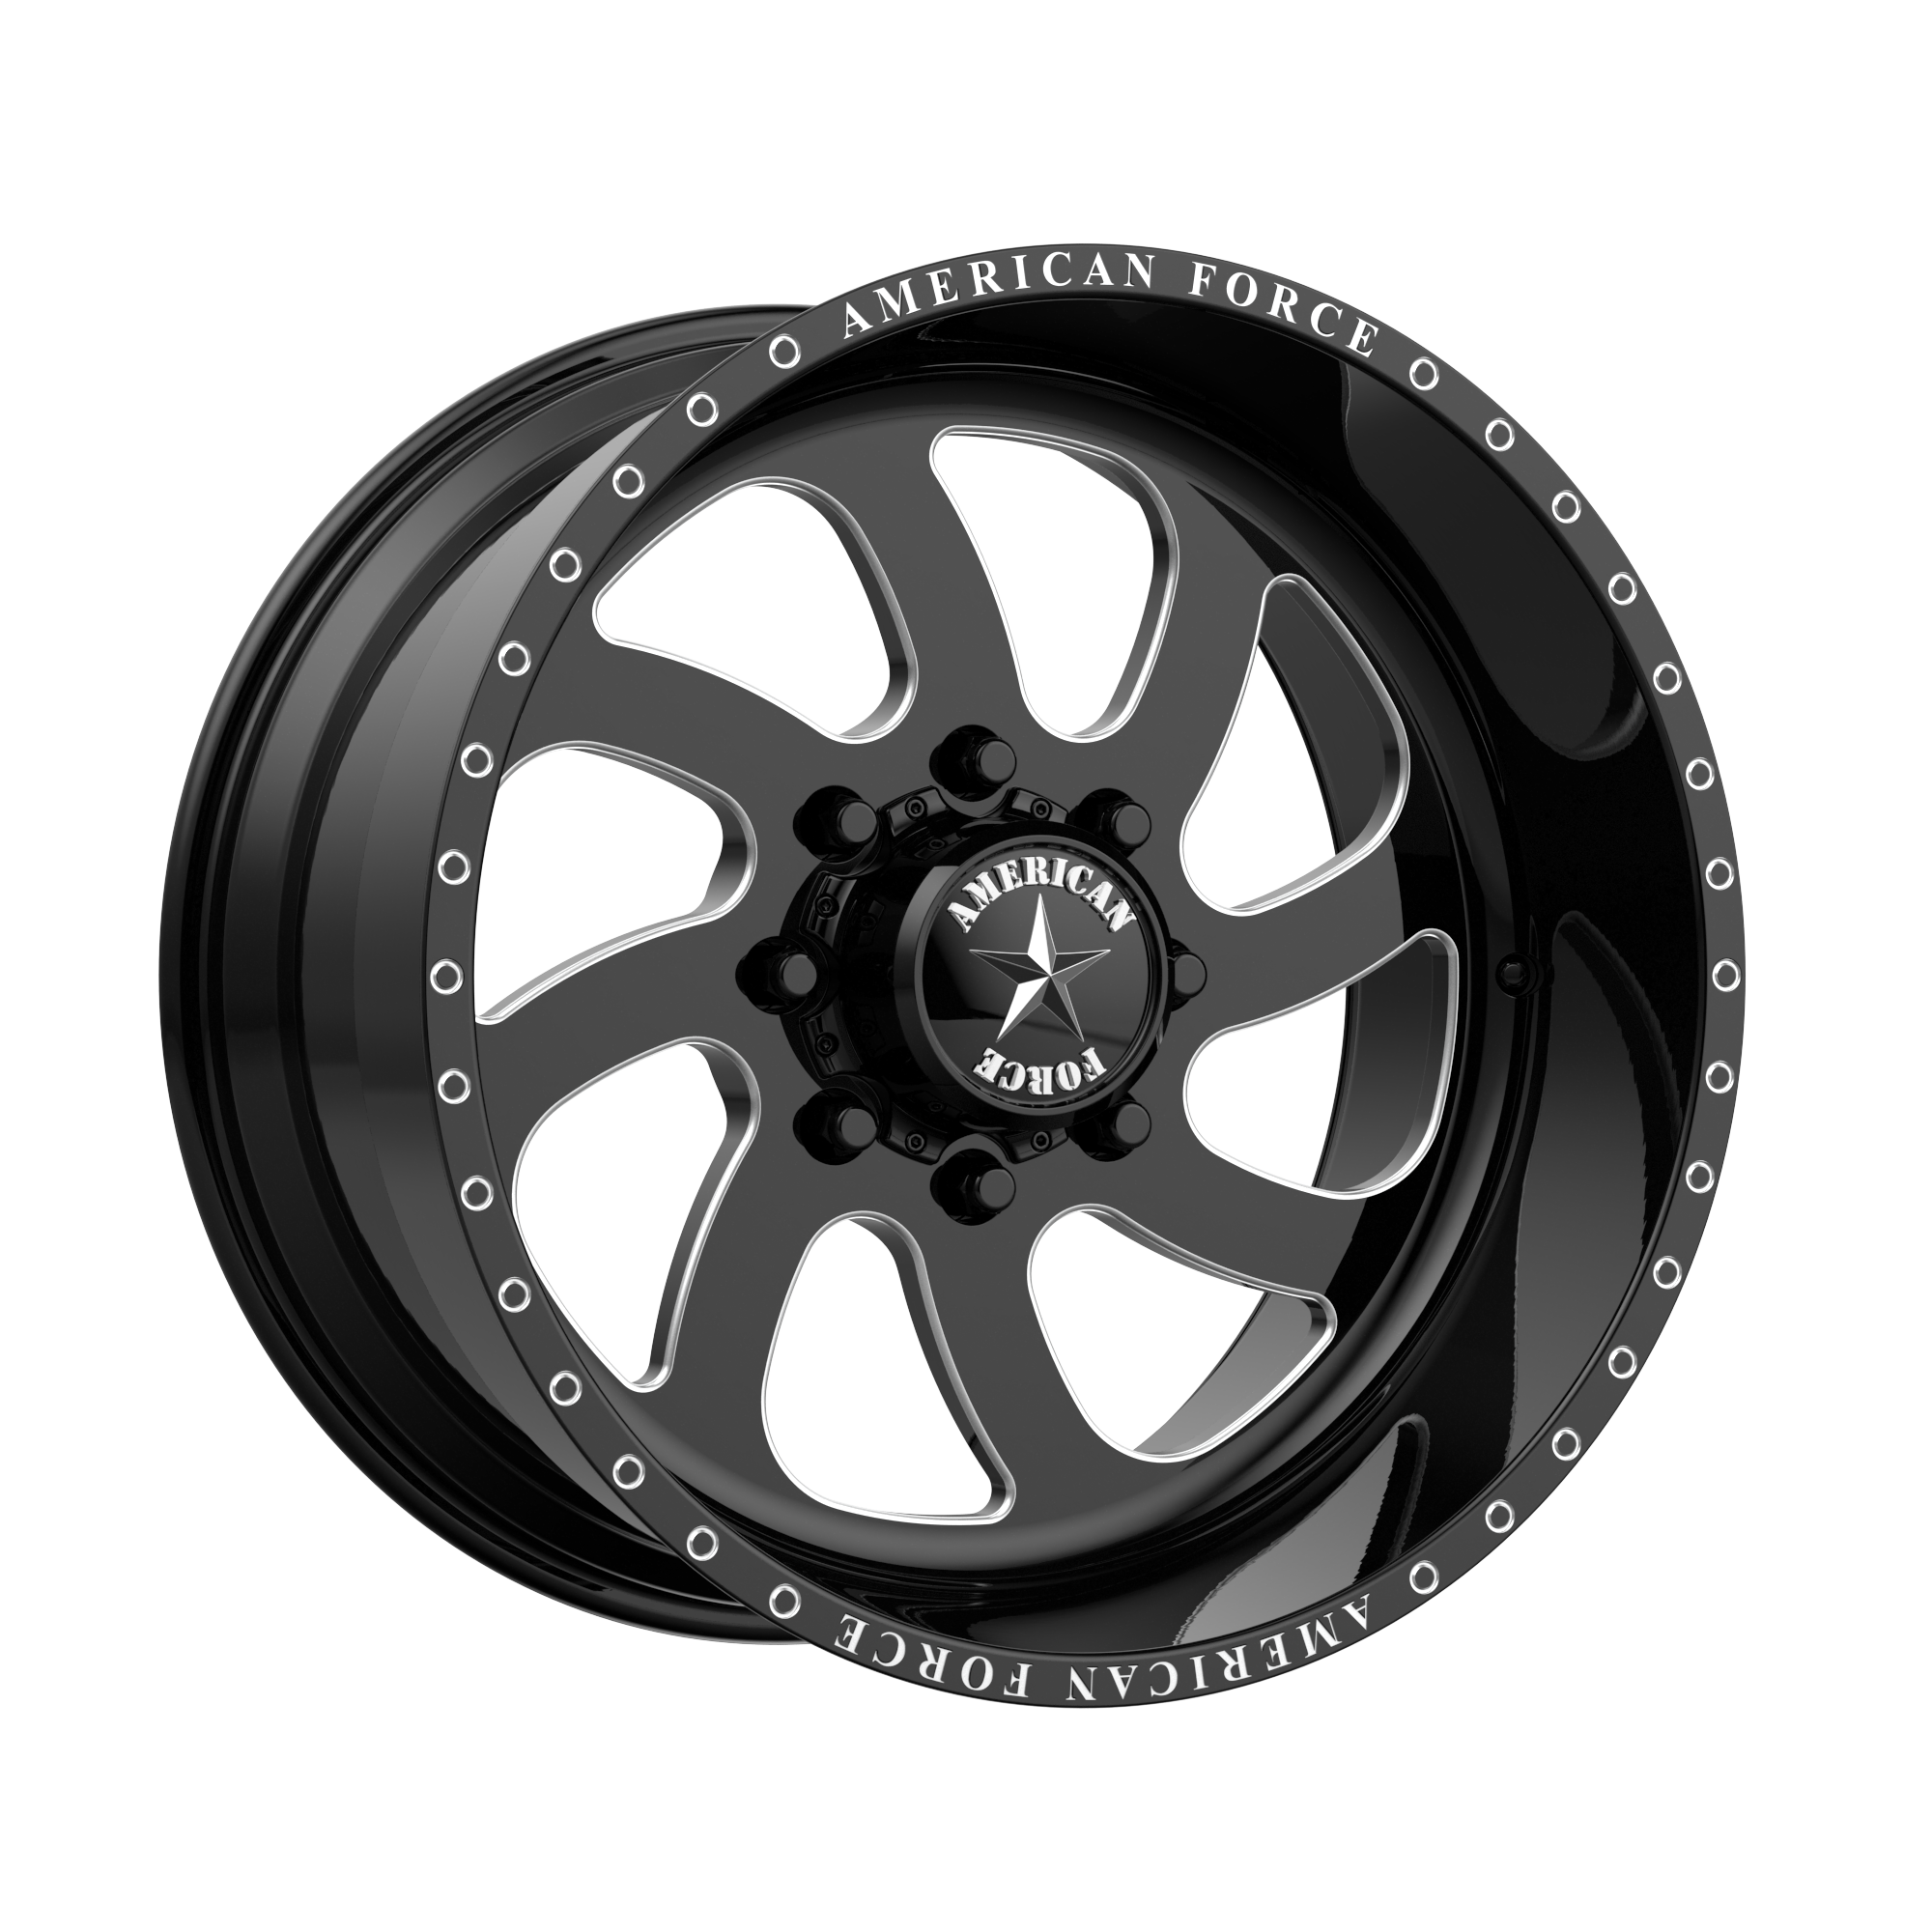 BLADE SS 20x14 6x135.00 GLOSS BLACK MACHINED (-73 mm) - Tires and Engine Performance